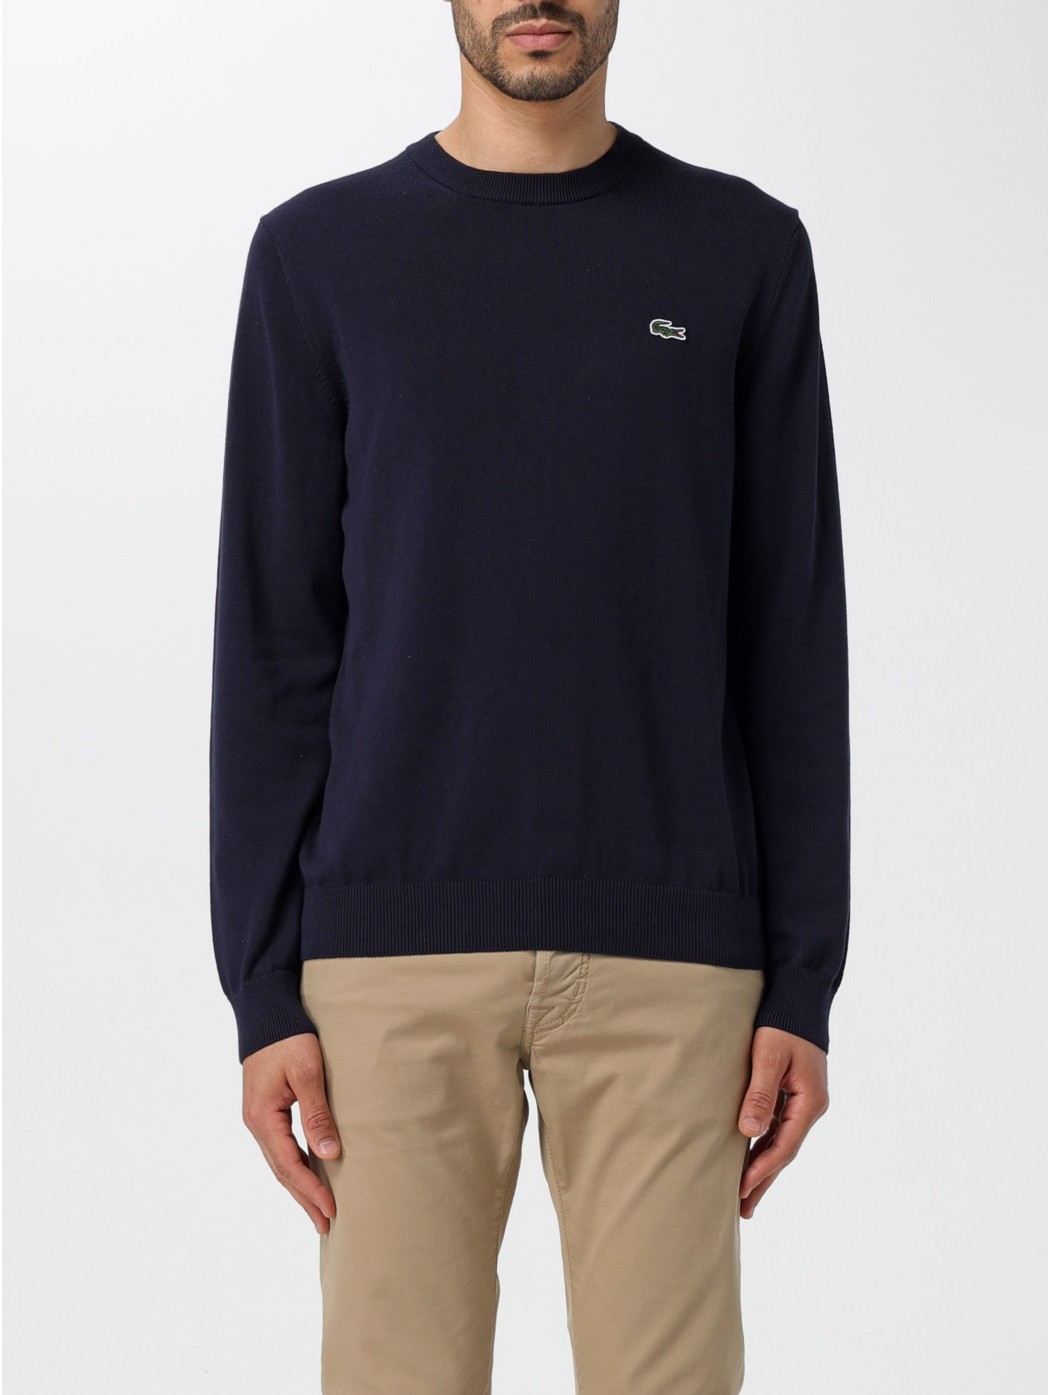 PULLOVER LACOSTE AH0128 166